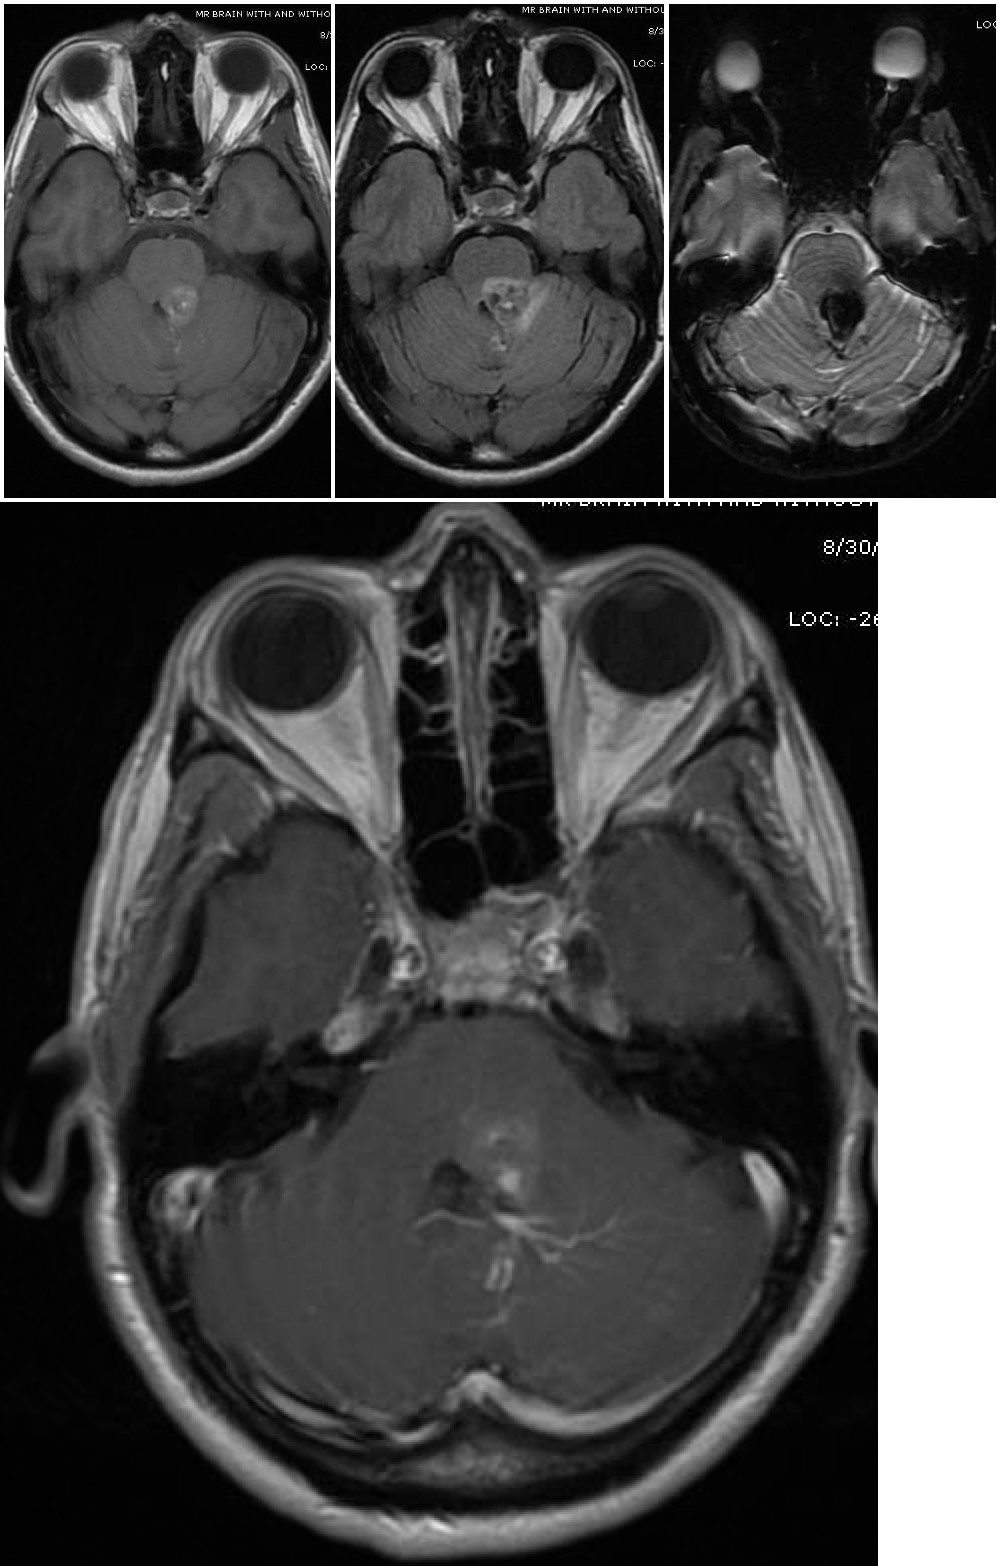 Top three images - Magnetic resonance imaging depicts a cavernous malformation in the left middle cerebellar peduncle of a 42 year old woman who presented with right sided facial numbness and ataxia. Varying signal intensities on T1- and T2-weighted sequences and detection of blood on susceptibility weighted sequences (left, middle, and right images, respectively) that are characteristic for a cavernoma are seen.
Bottom Image - weighted image with contrast enhancement shows a large developmental venous anomaly (DVA) that is associated with the adjacent cavernous malformation. 